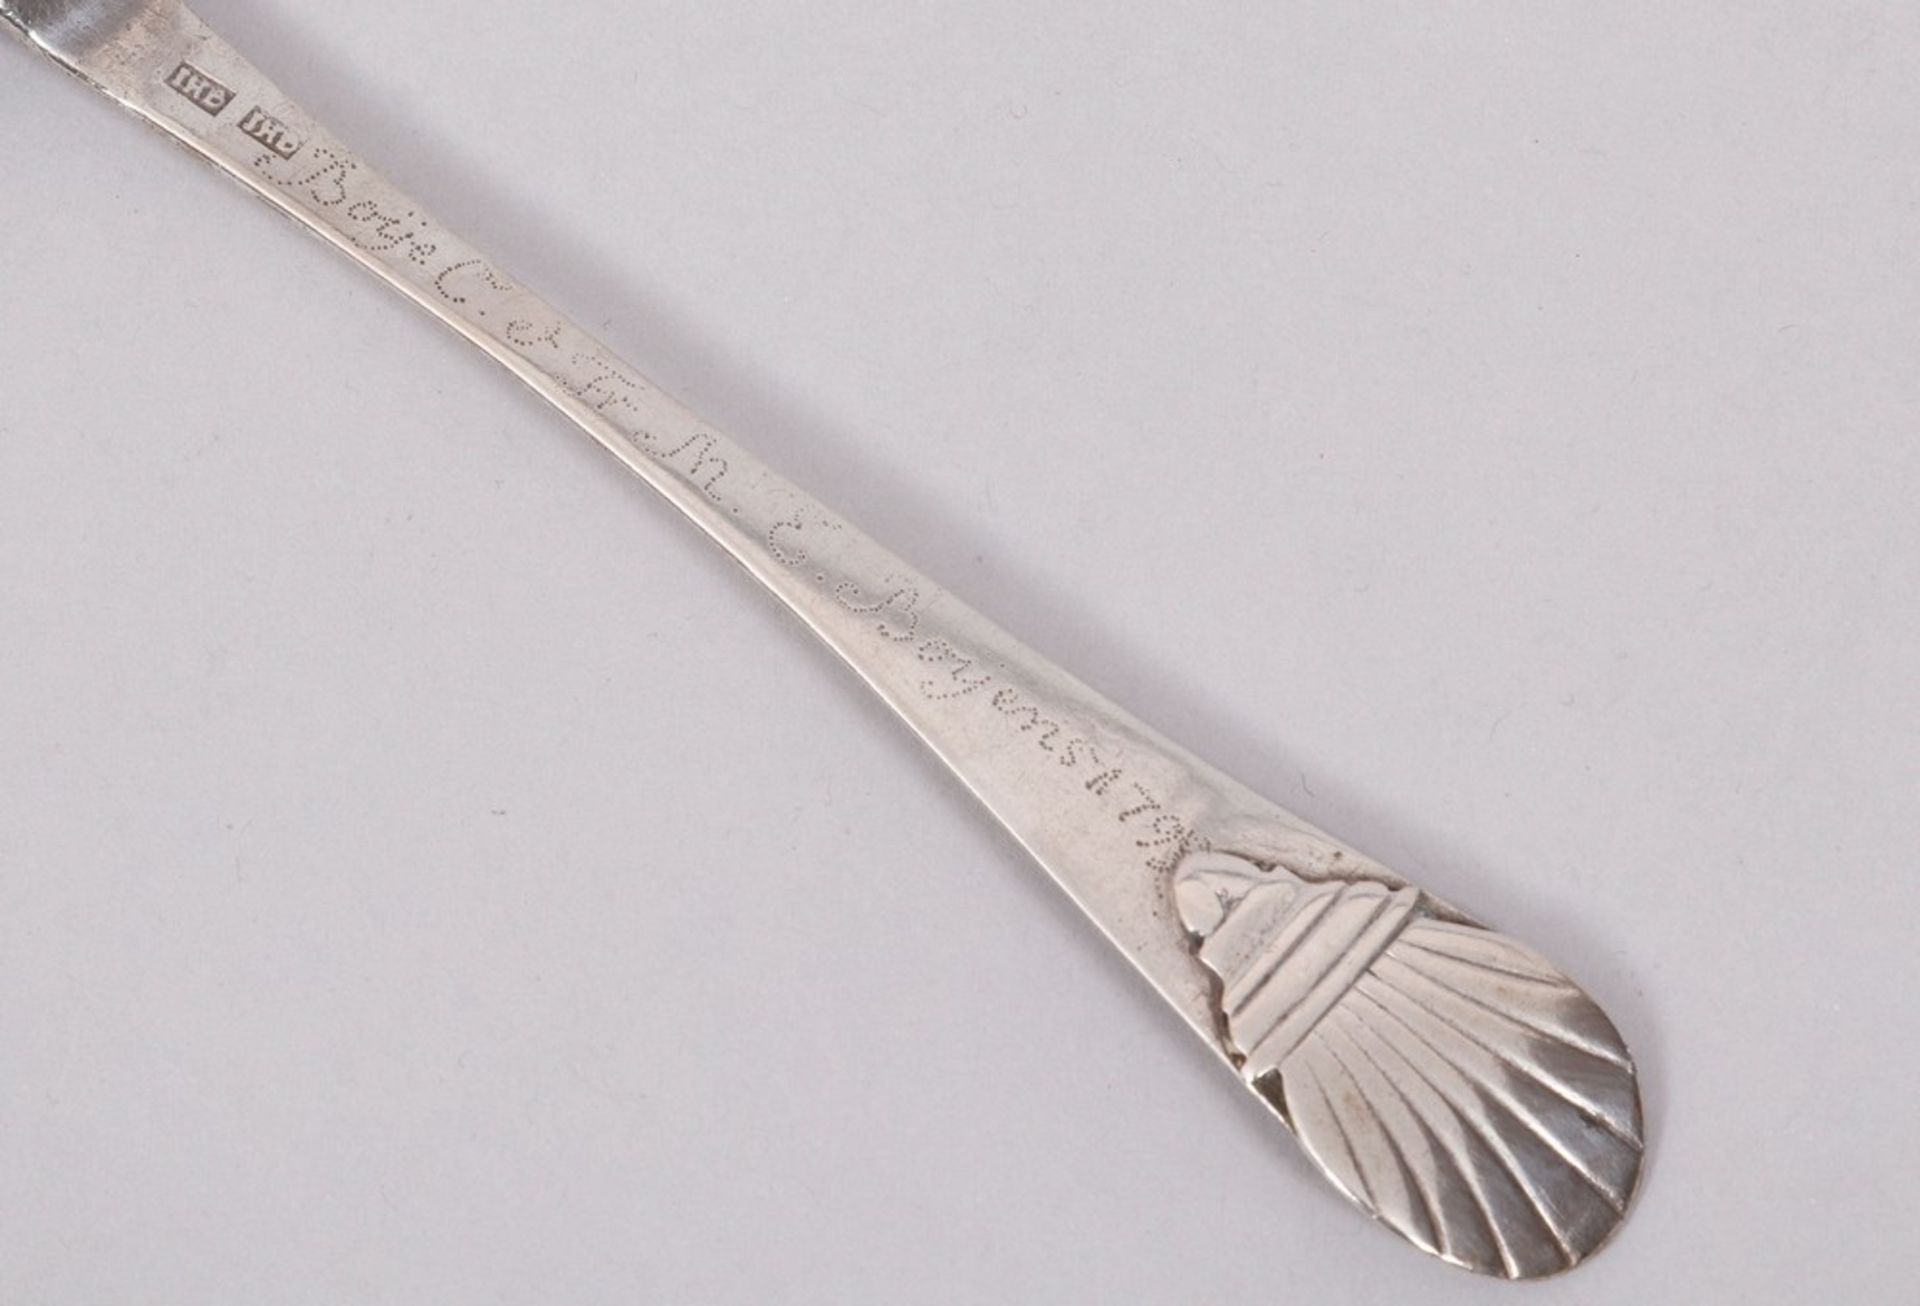 2 Baroque dining spoons, silver, probably North German, 18th C. - Image 9 of 9